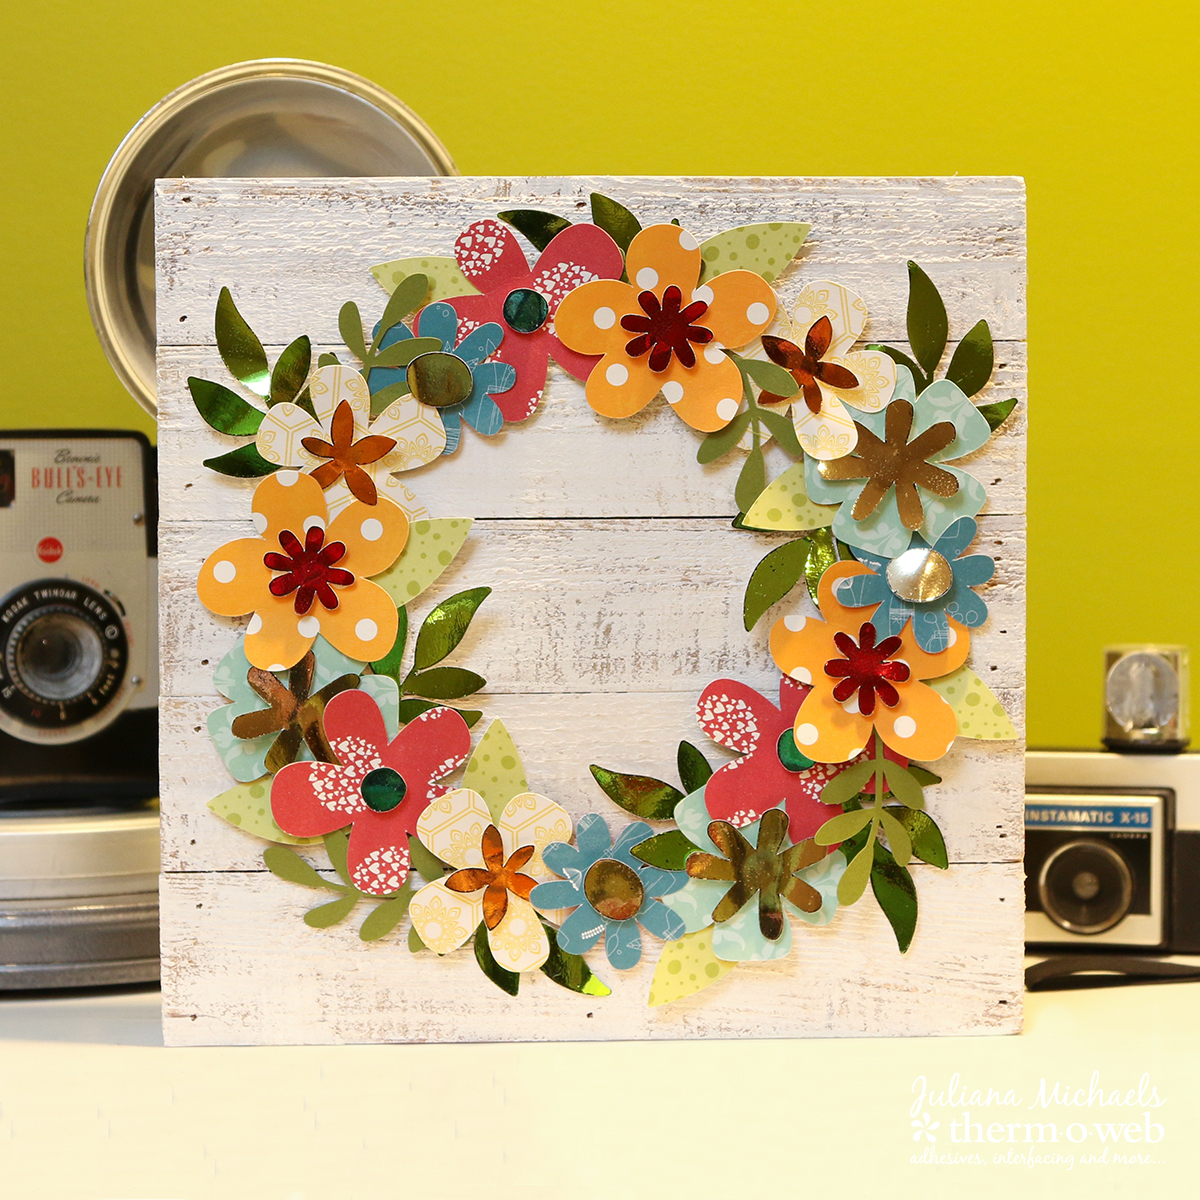 Deco Foil Spring Wreath by Juliana Michaels featuring Therm O Web Deco Foil, Transfer Sheets and Adhesives